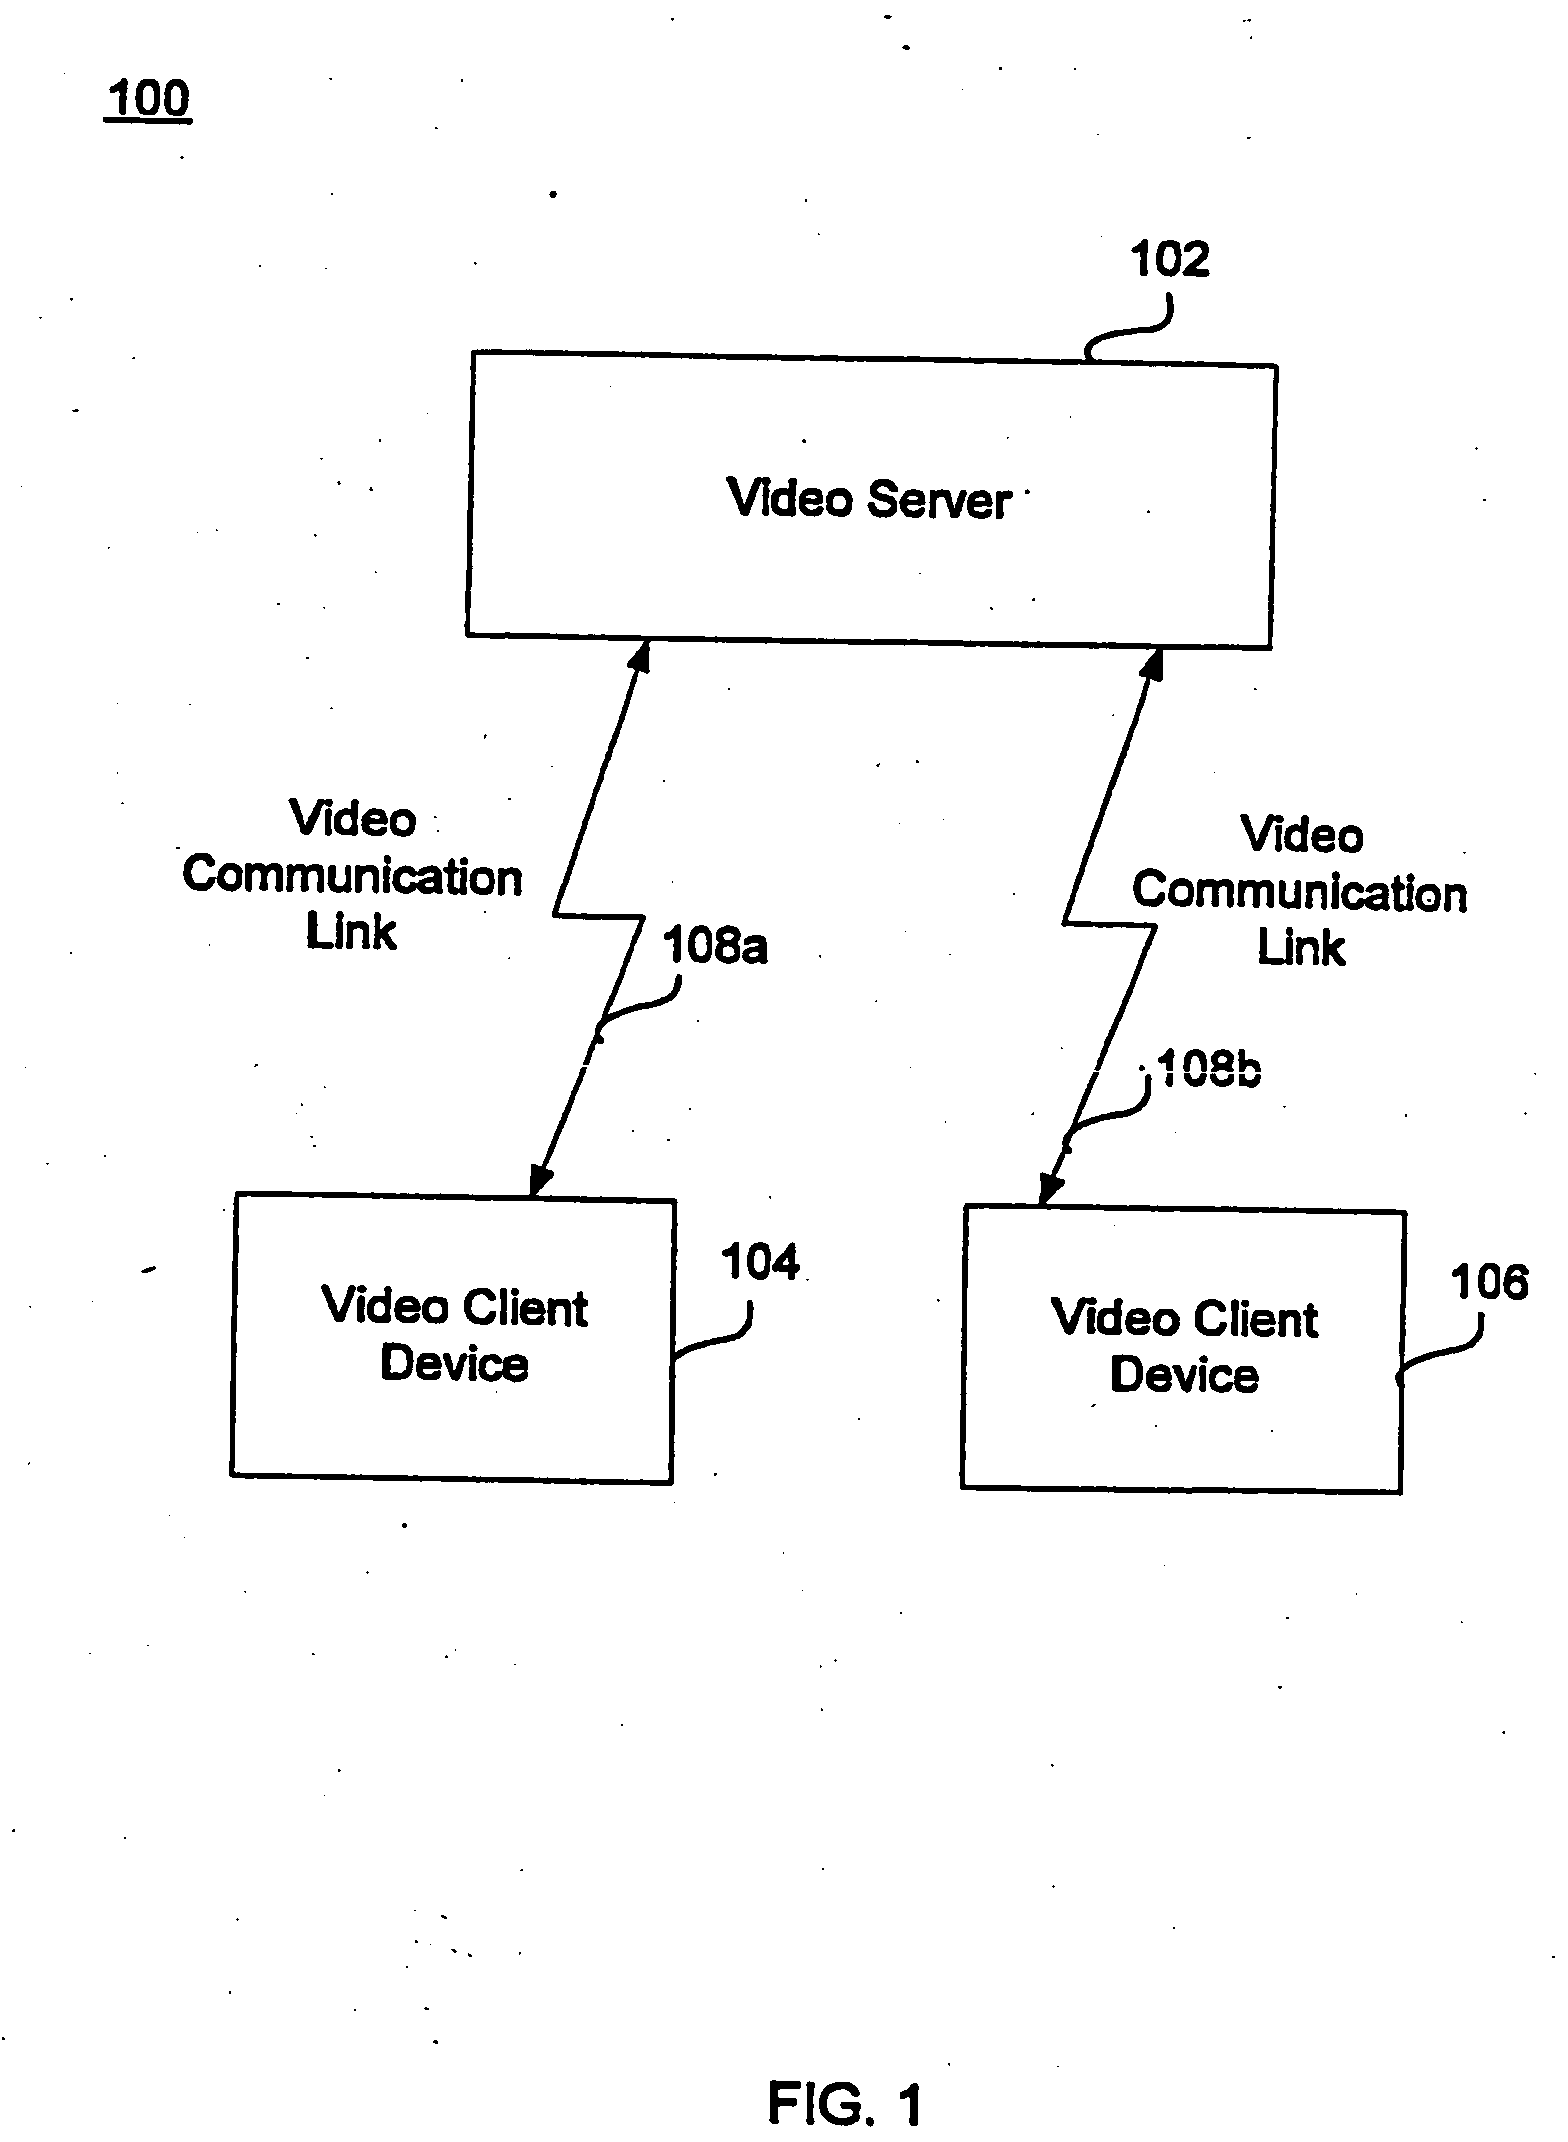 Method and system for adaptive transcoding and transrating in a video network